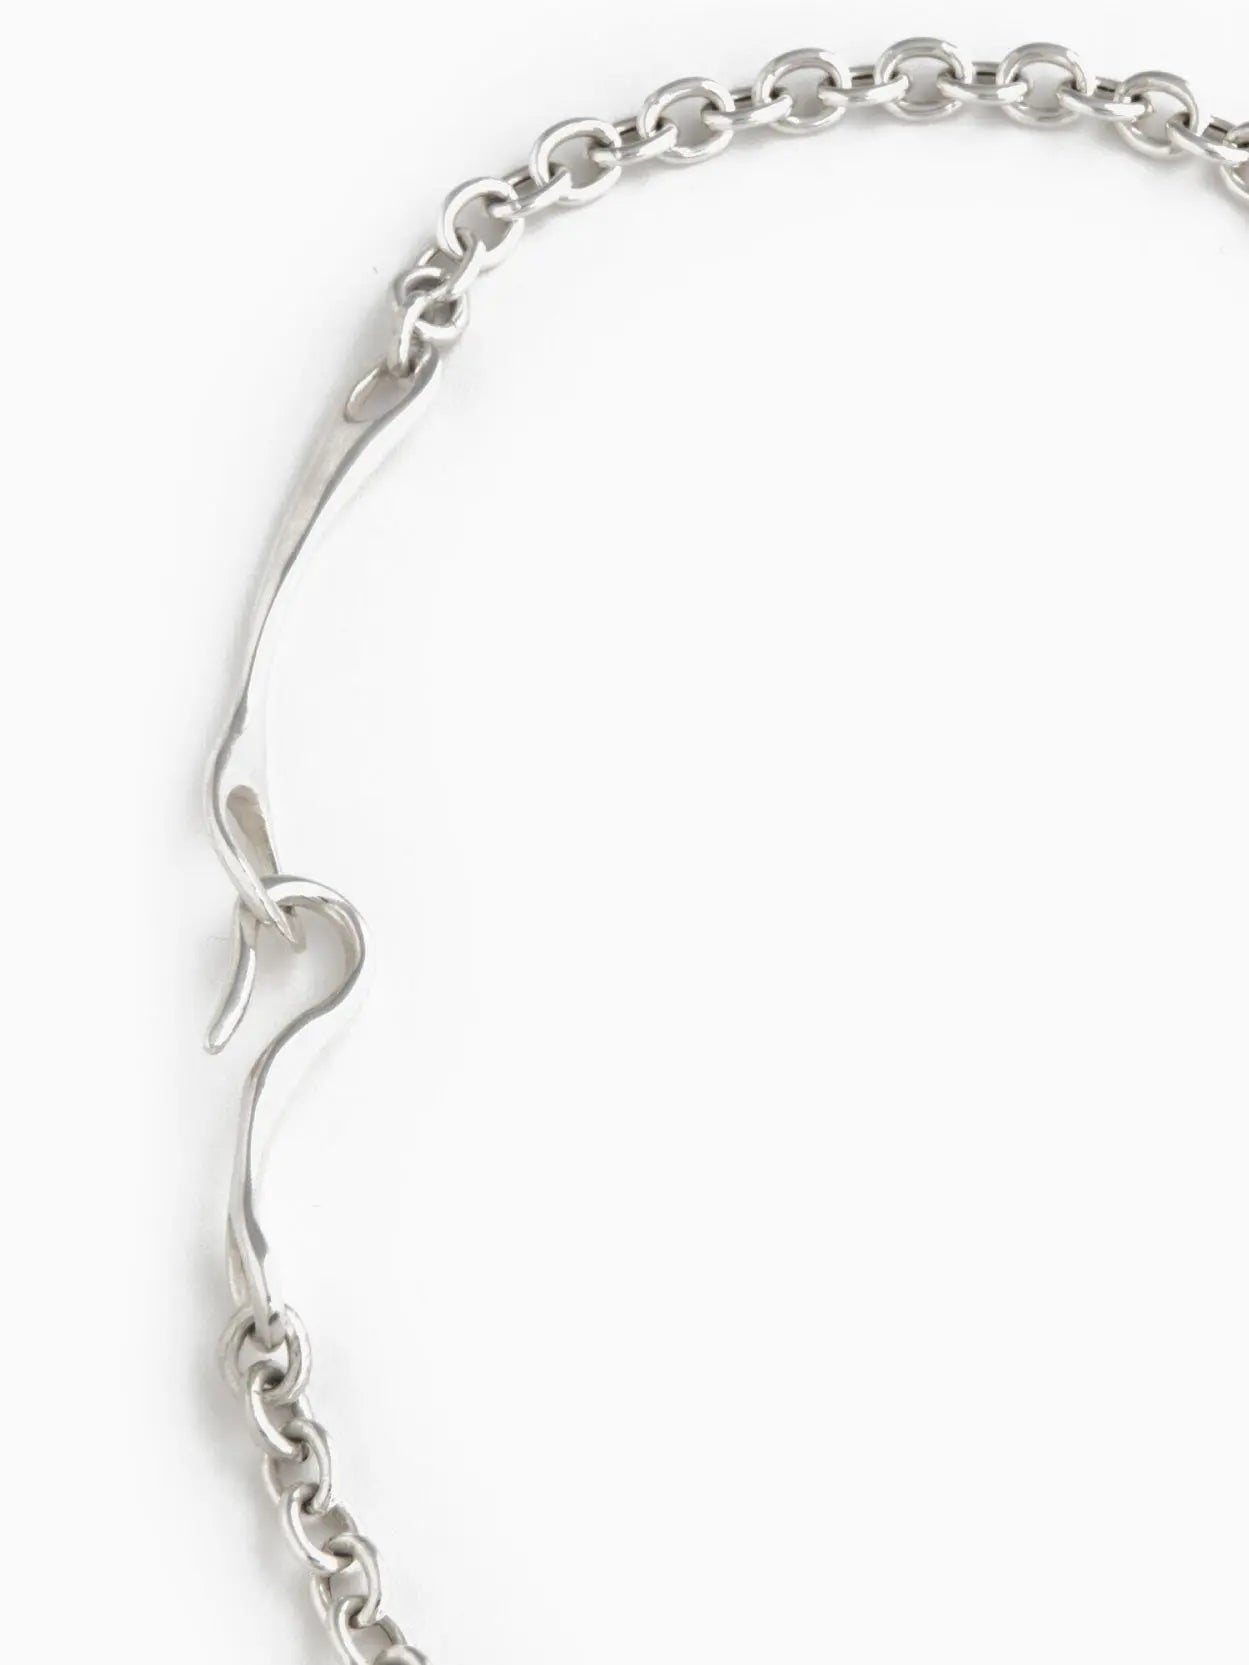 A Maia Necklace from Nathalie Schreckenberg, featuring a linked chain design with a small heart-shaped clasp, laid out in an oval shape on a white background.